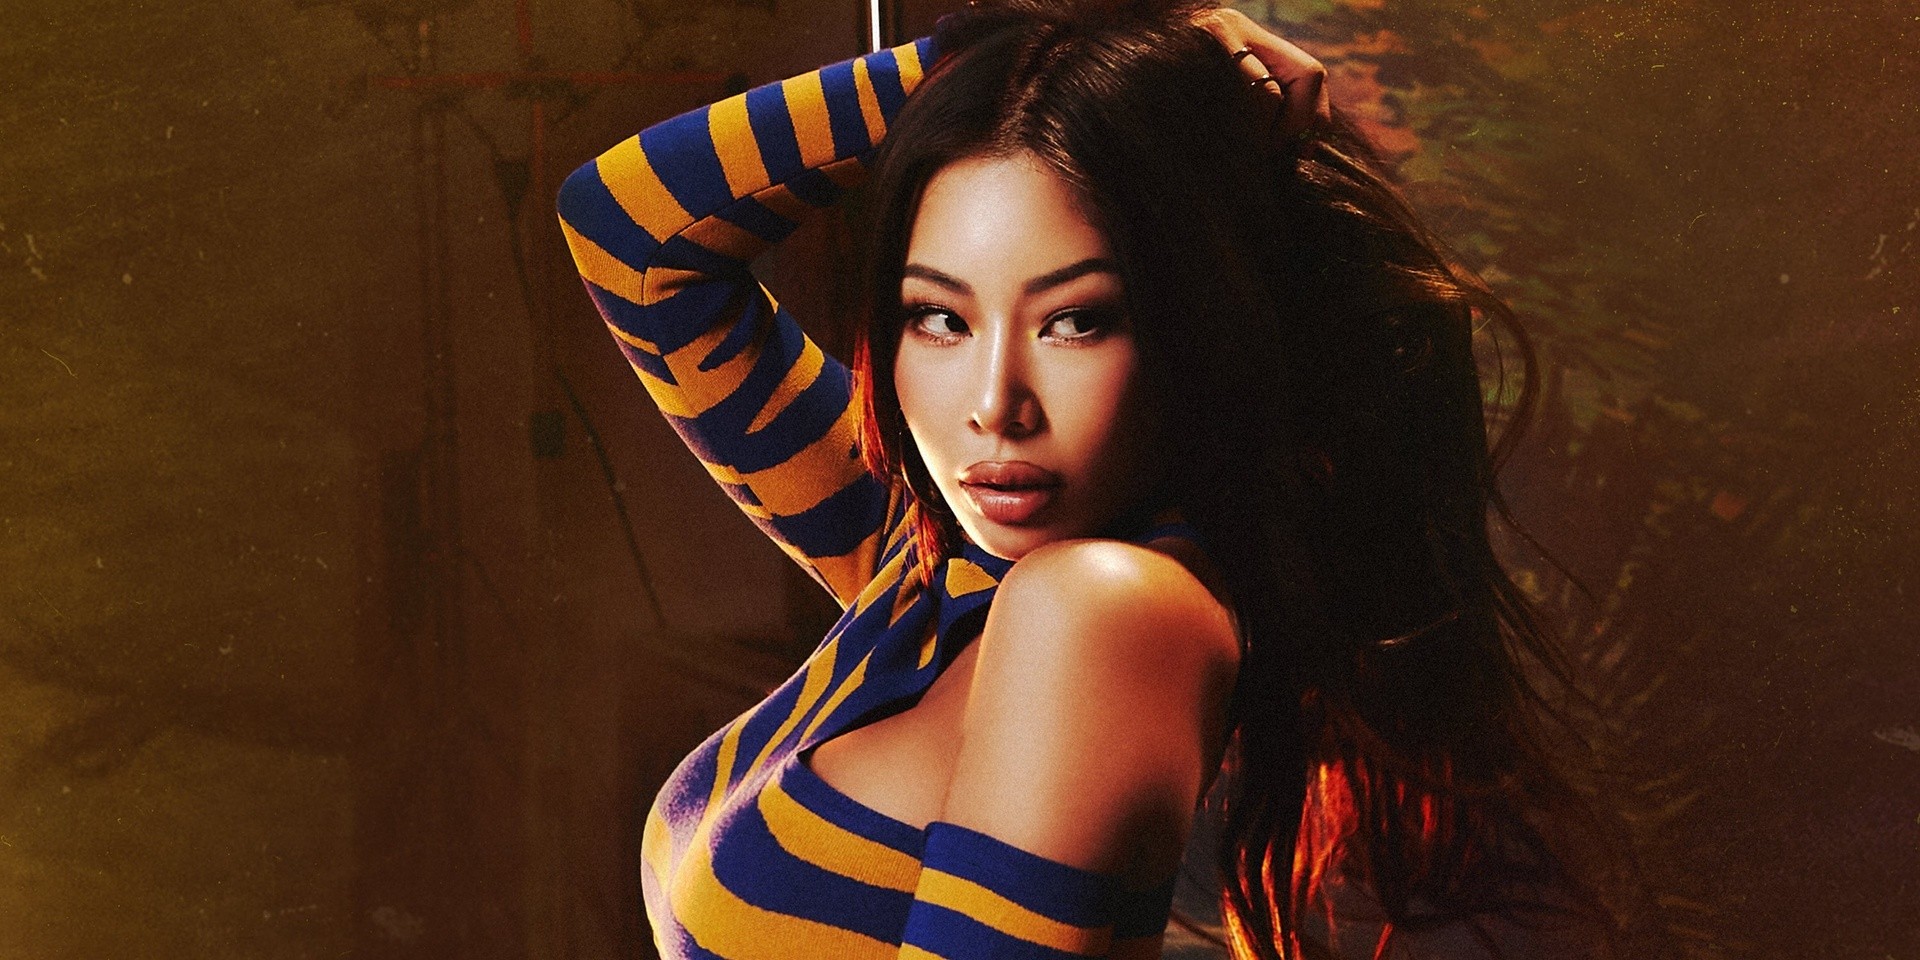 Jessi is coming to Manila this September